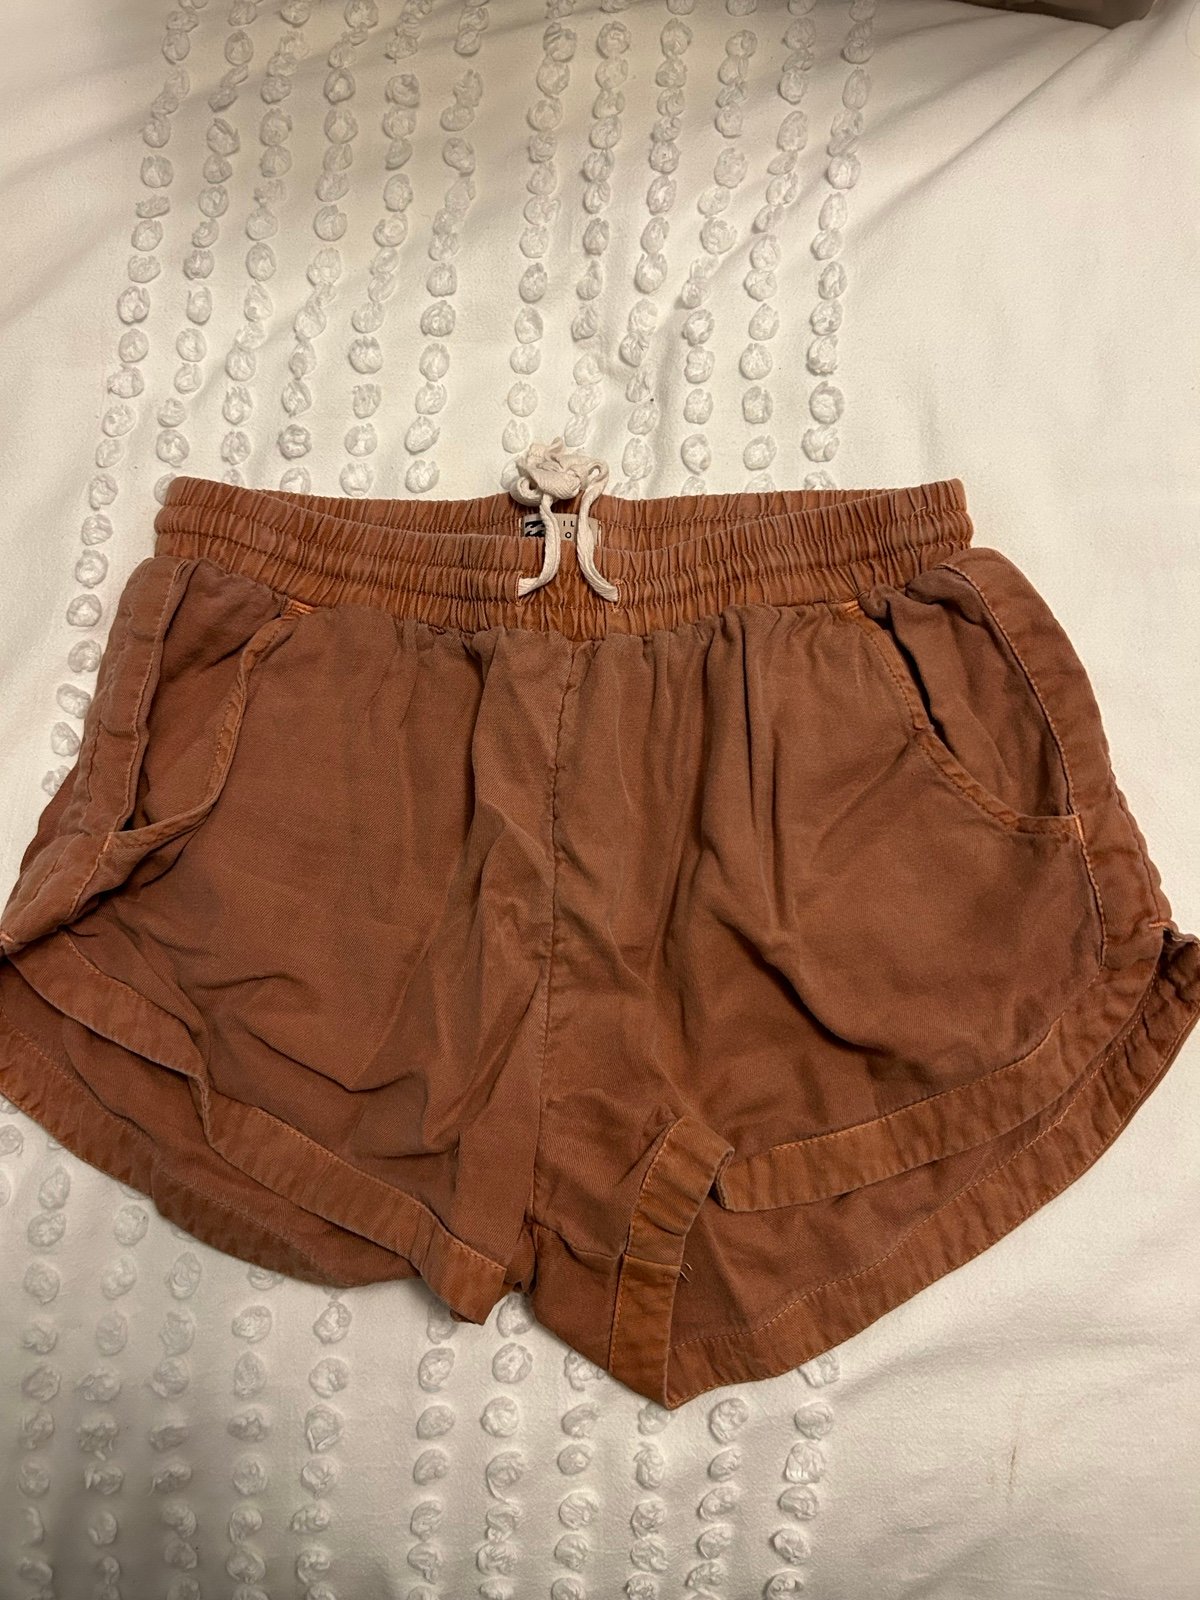 cheapest place to buy  Billabong Shorts NxLYRNQoE Counter Genuine 